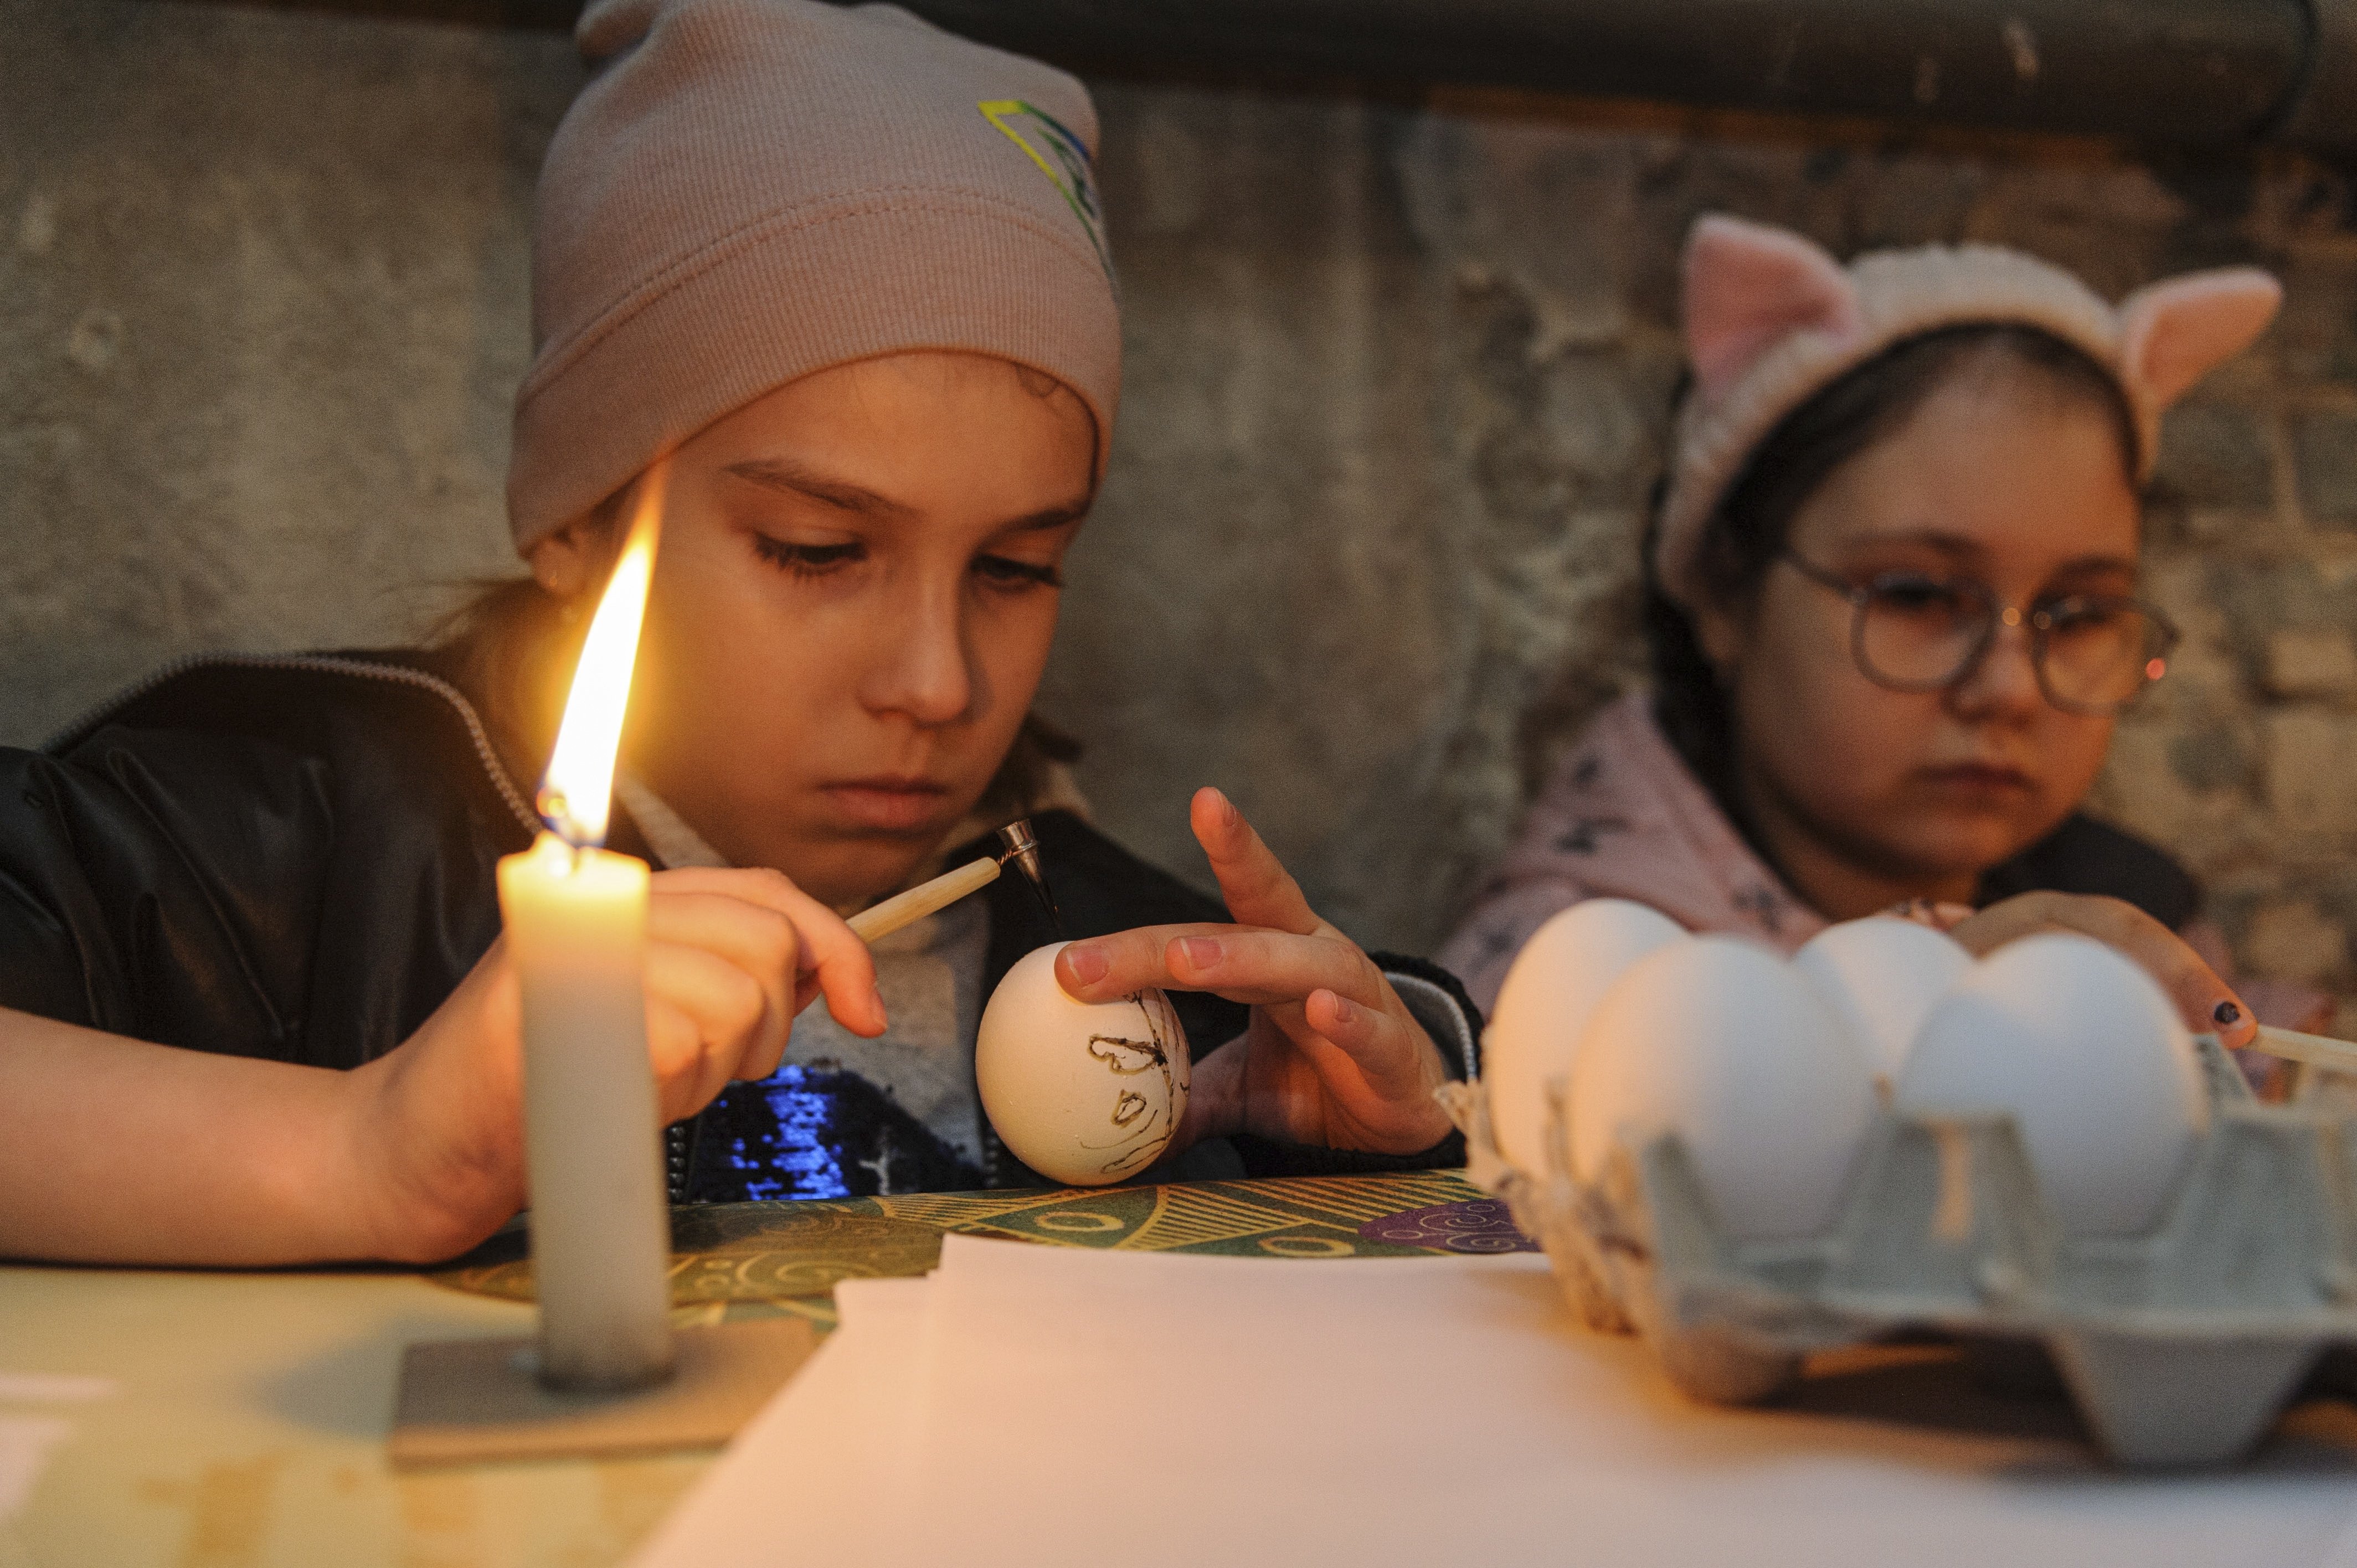 Locals and refugees from Eastern Ukraine attend a masterclass titled "Easter painting in a bomb shelter" in order to preserve Ukrainian folk traditions in Lviv, Ukraine, April 19, 2022. (EPA Photo)